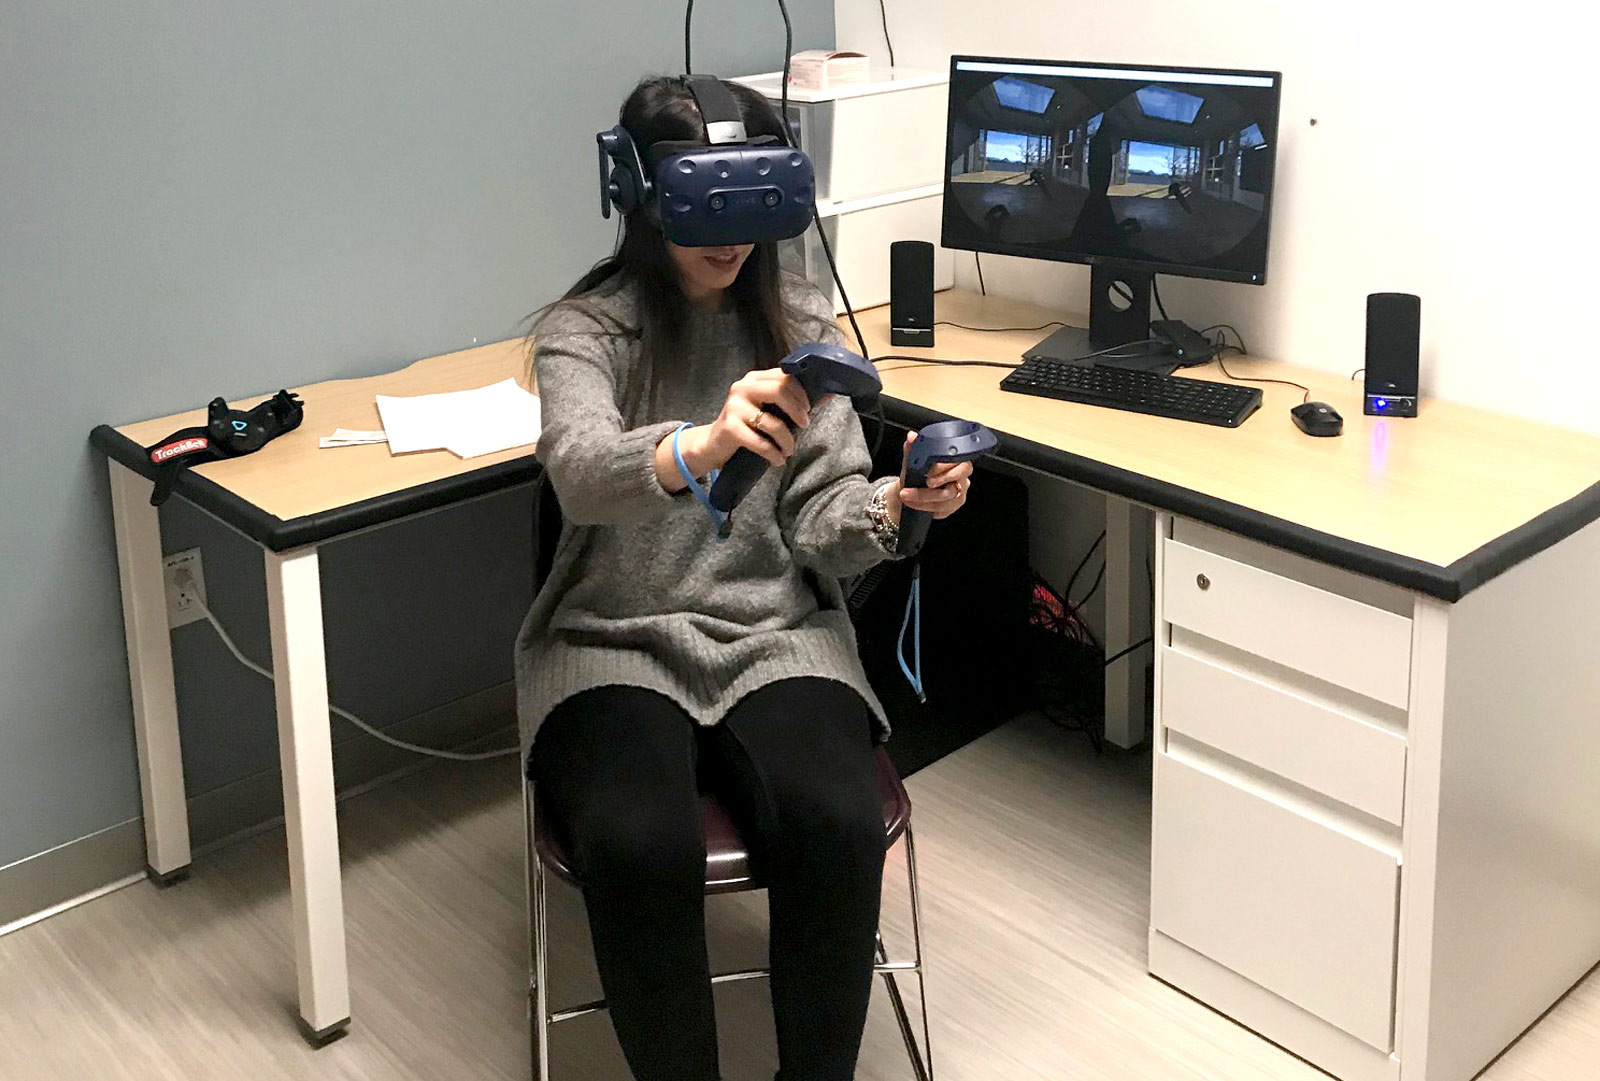 Patient wearing headset with handheld controllers experiences VR